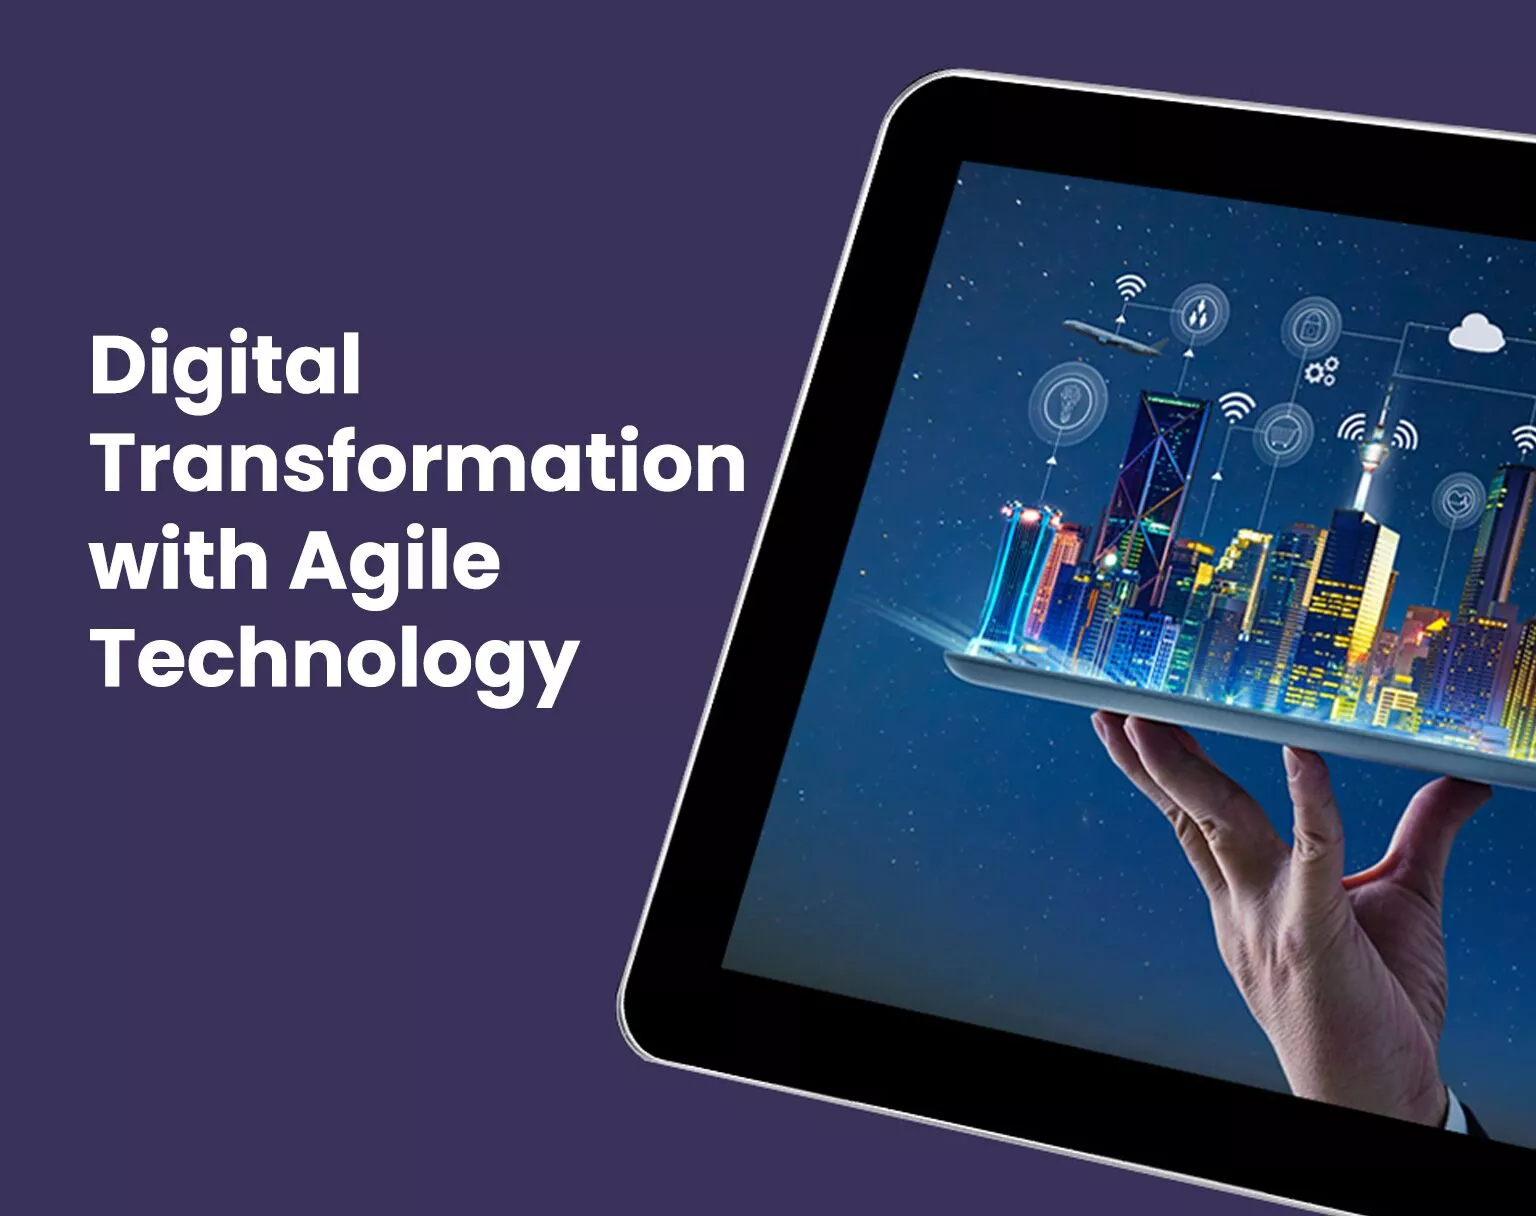 Digital Transformation with Agile Technology - Case Study